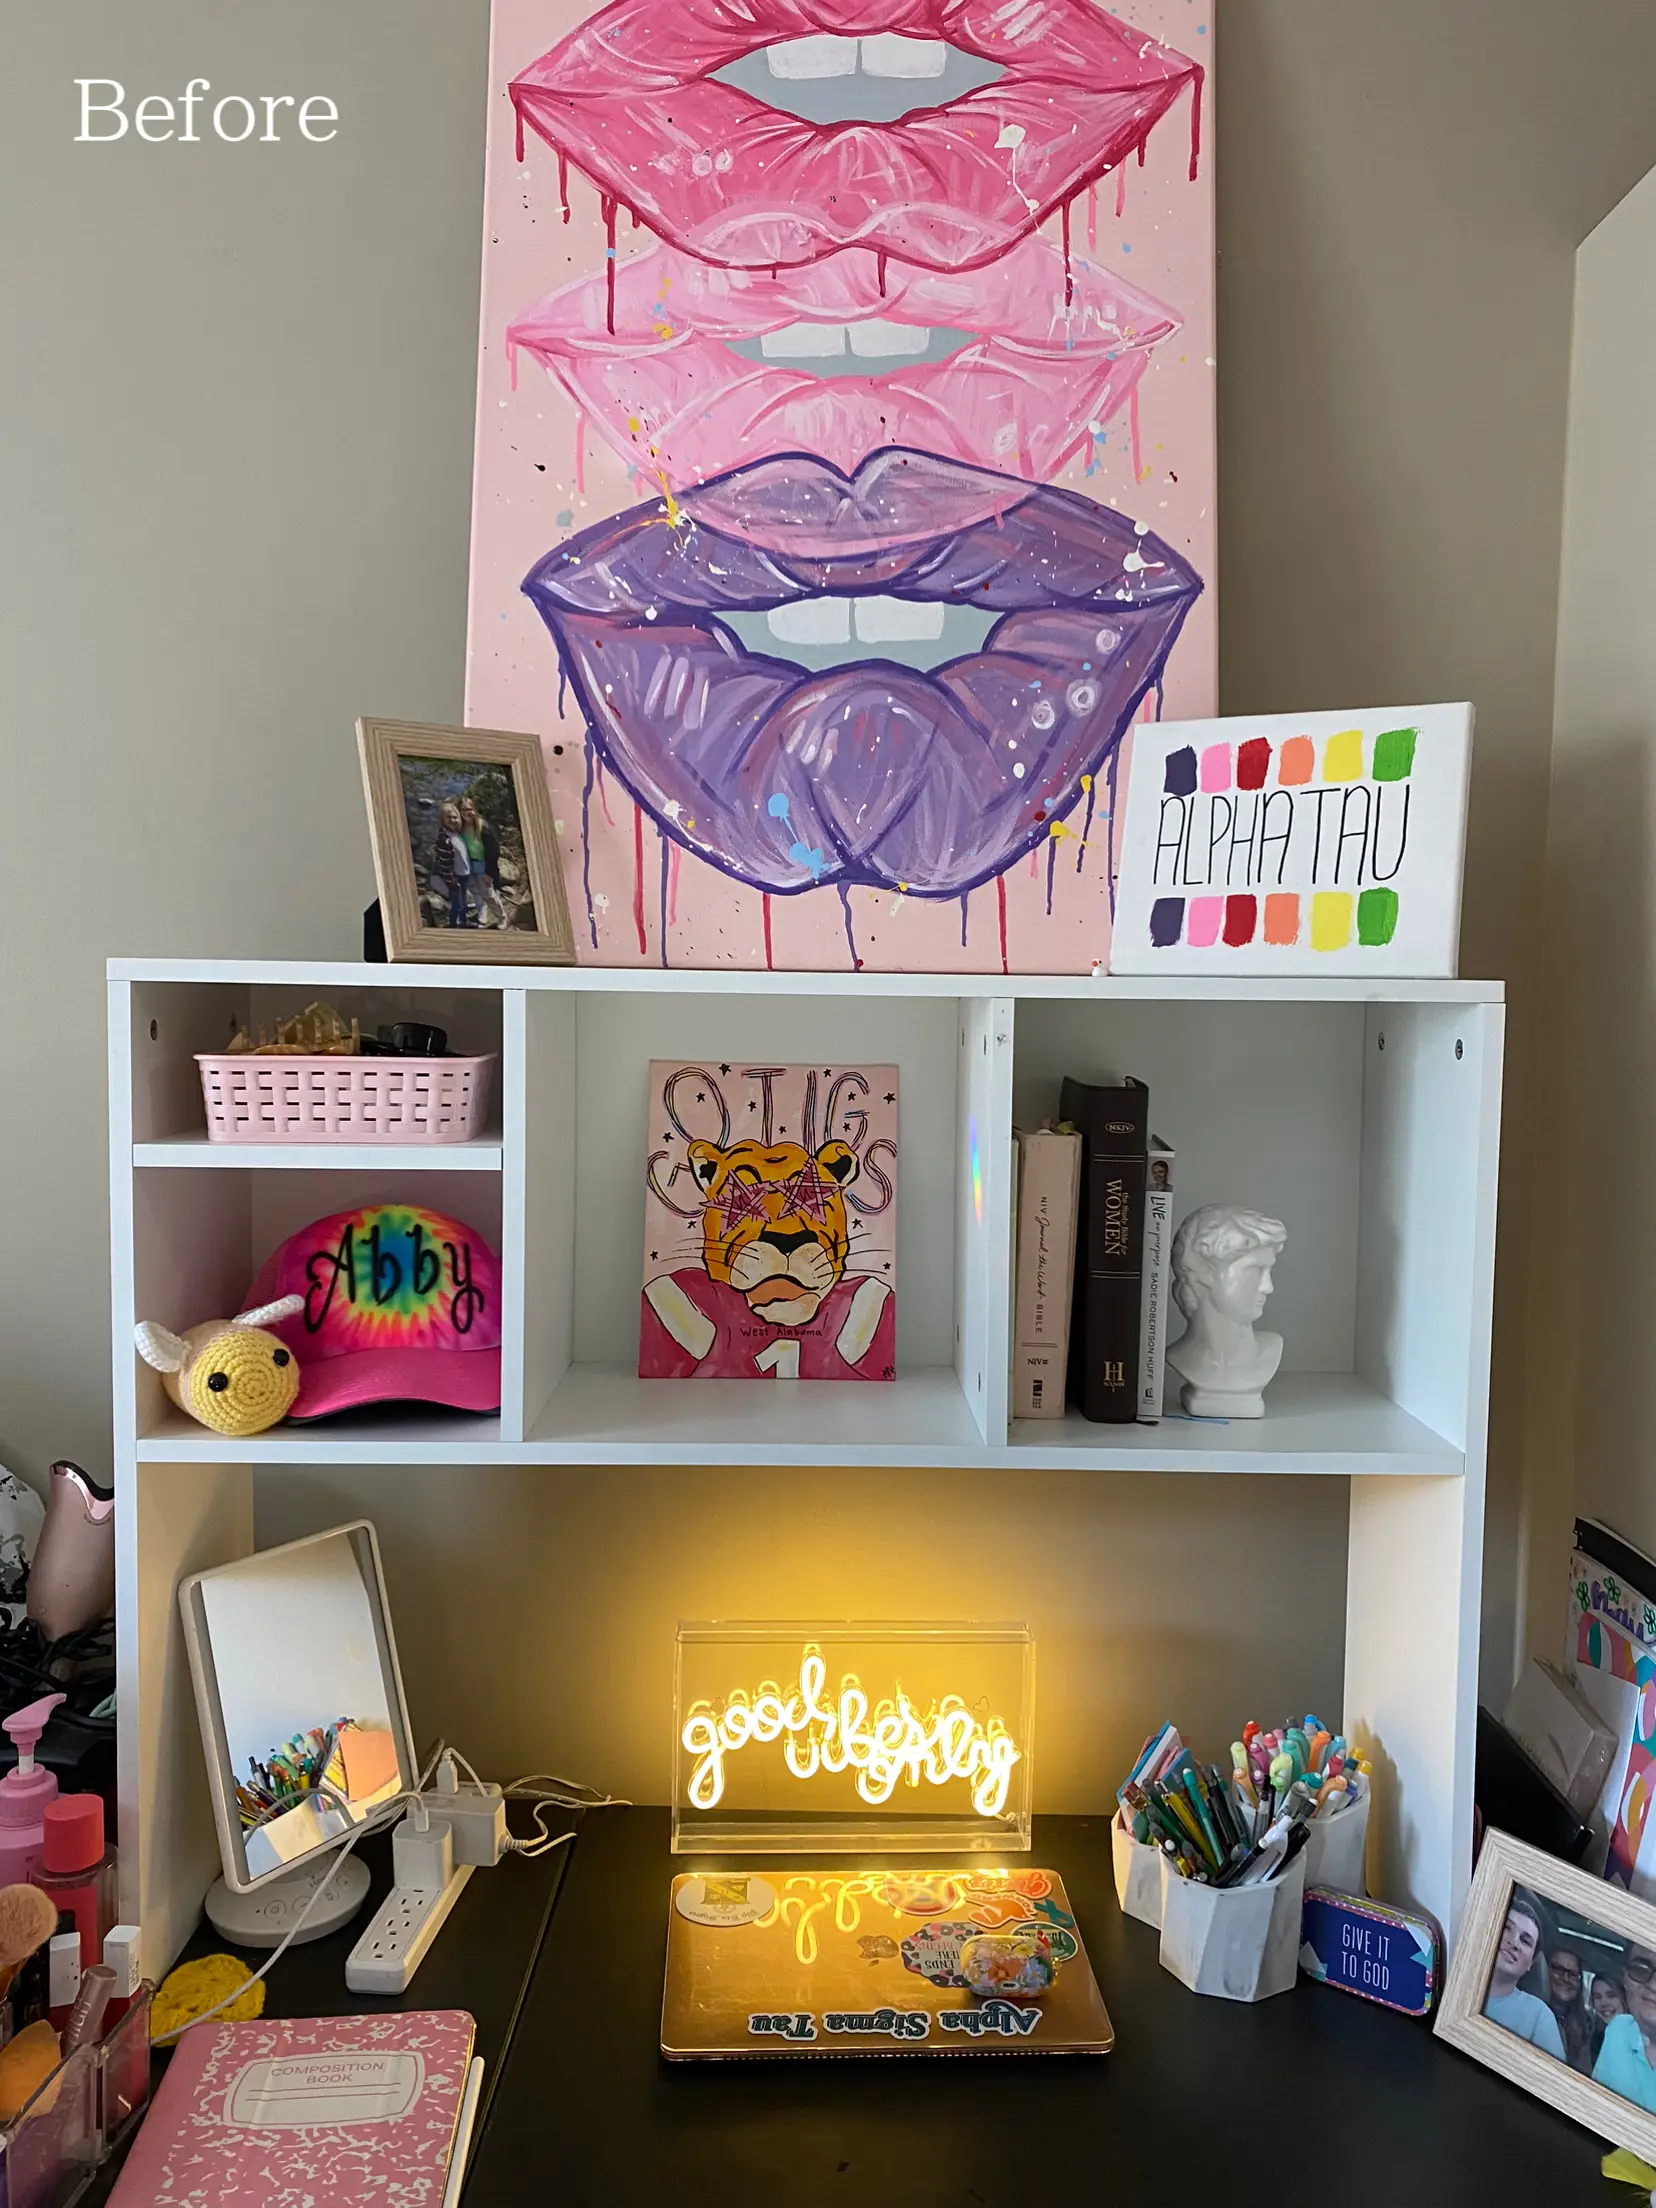  A bookshelf with books and a painting of a woman's lip.